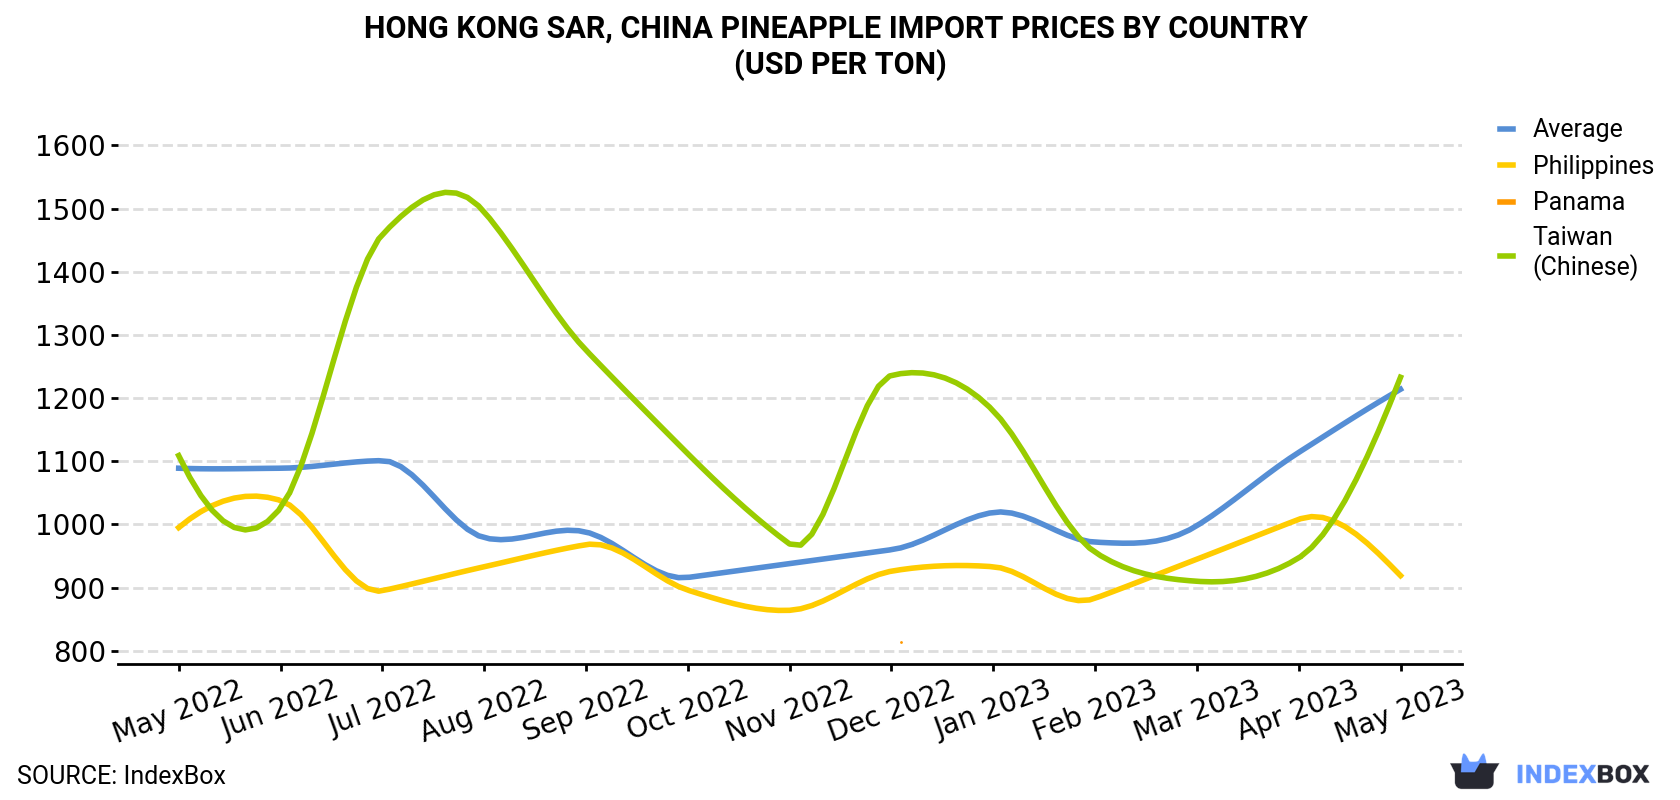 Hong Kong Pineapple Import Prices By Country (USD Per Ton)